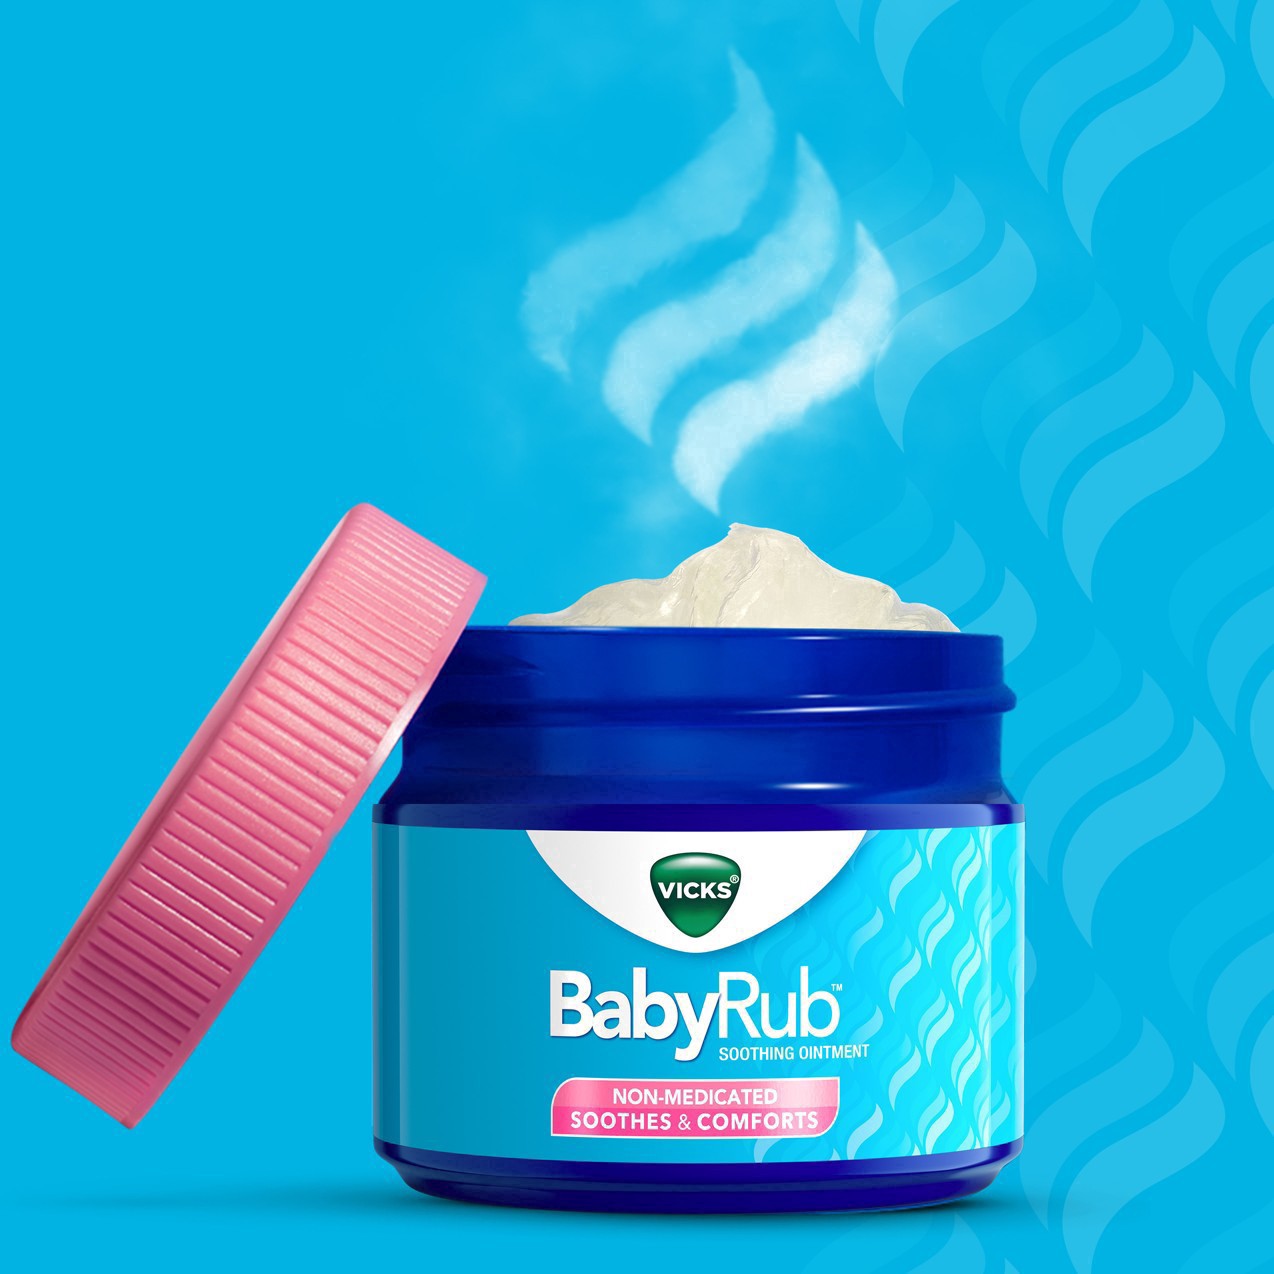 slide 48 of 78, Vicks BabyRub, Chest Rub Ointment with Soothing Aloe, Eucalyptus, Lavender, and Rosemary, from The Makers of VapoRub, 1.76 oz, 1.76 oz